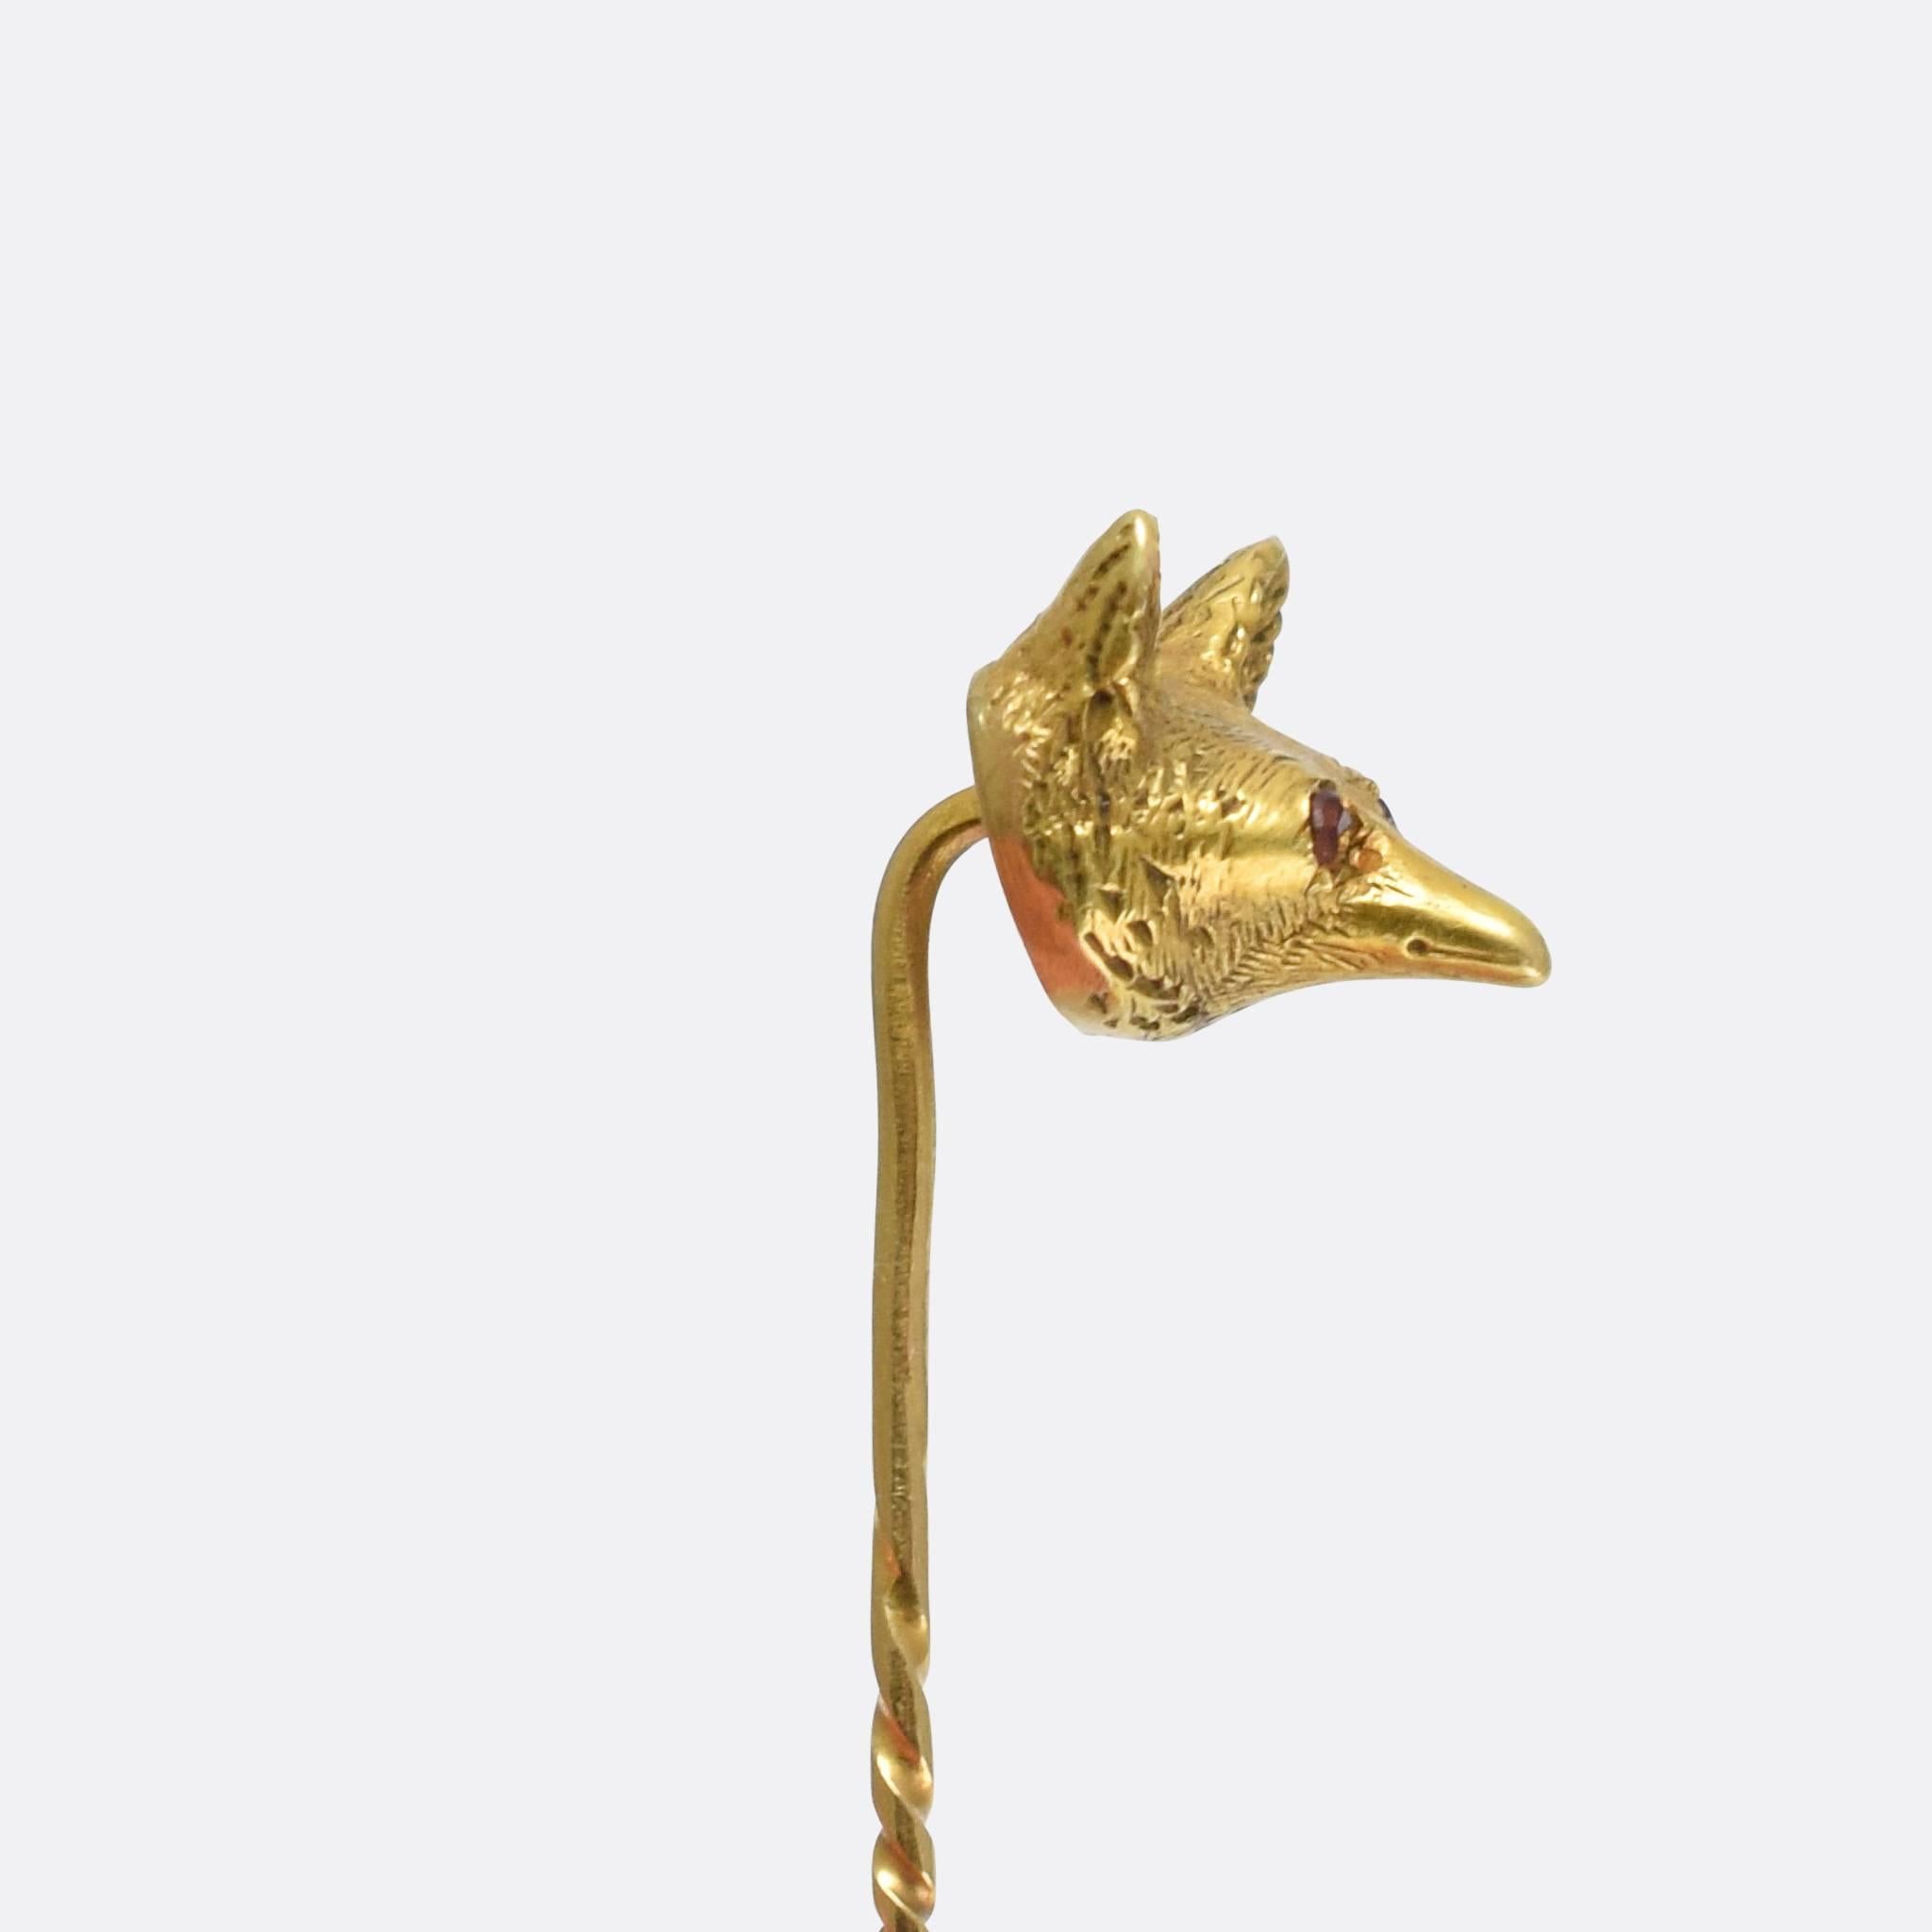 A cute antique fox pin dating from the late Victorian era. The head is beautifully textured, and the eyes set with faceted rubies. Modelled in 15 karat gold throughout, the fox has a sweet, almost cartoon-like face with a long snout.

STONES
Ruby